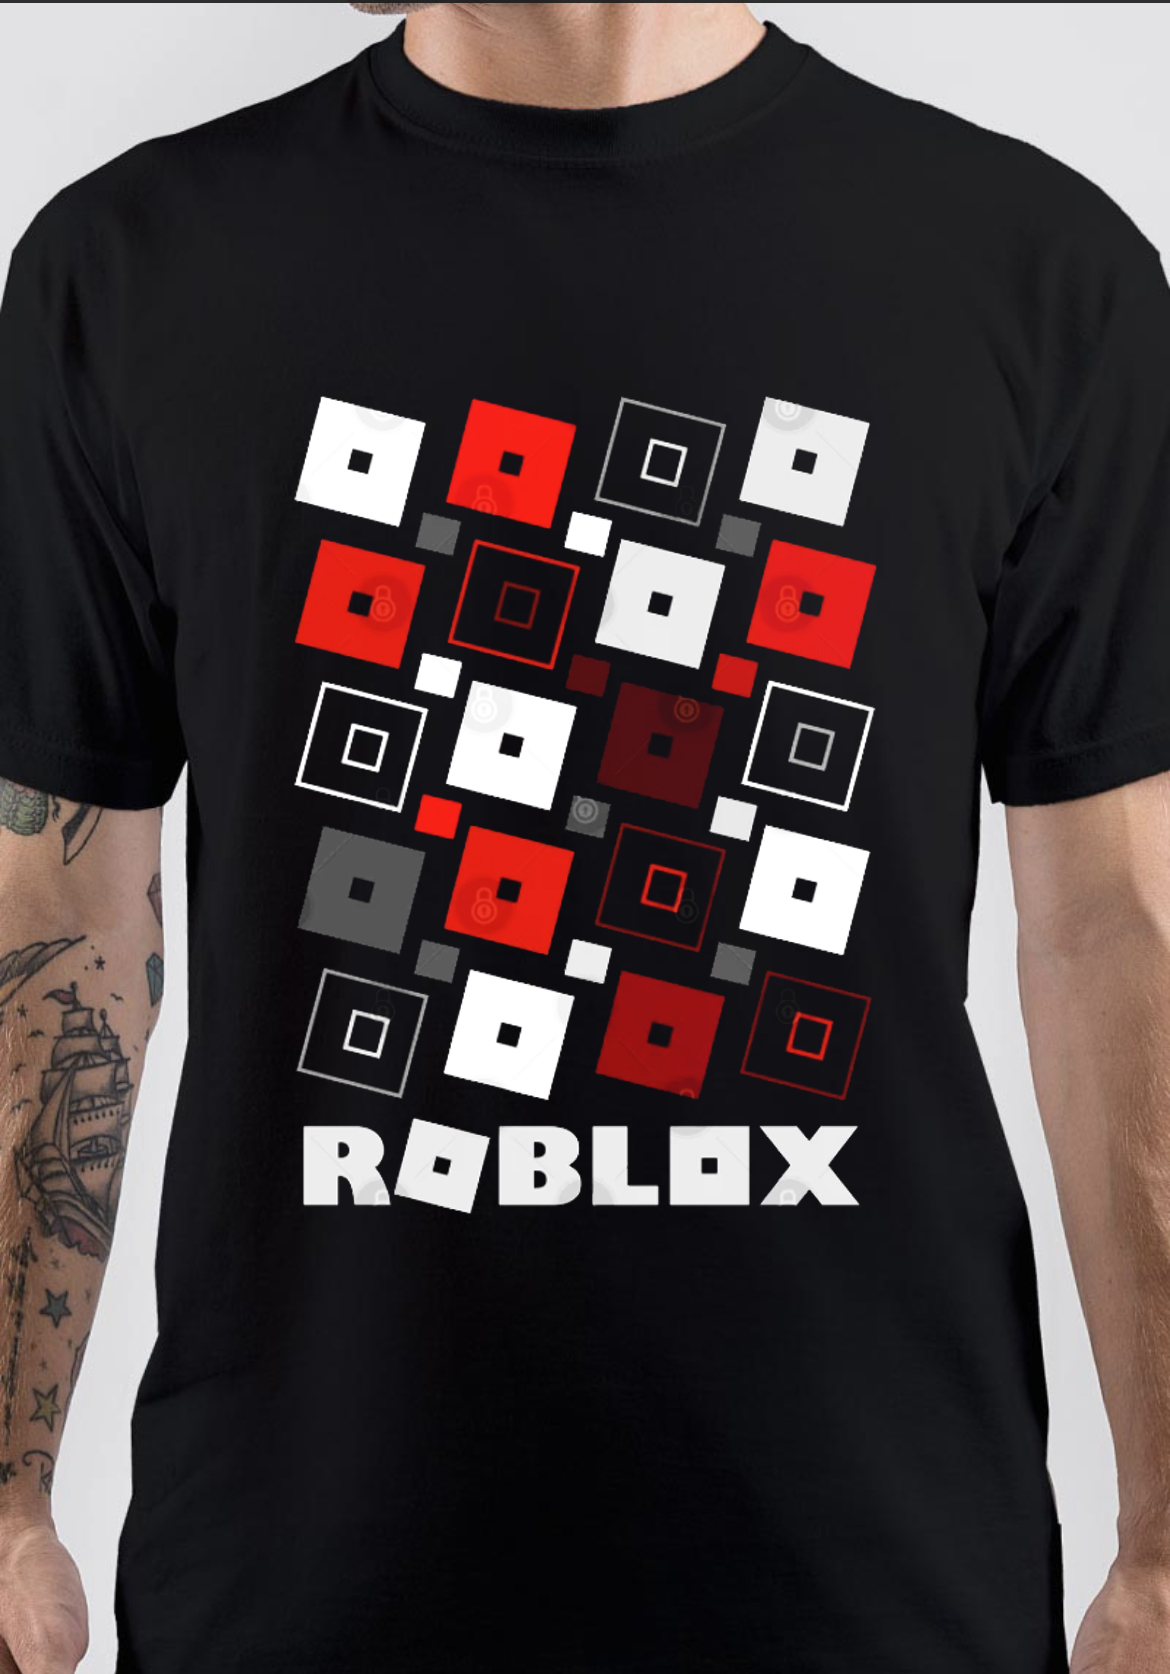 lacoste t shirt - Roblox